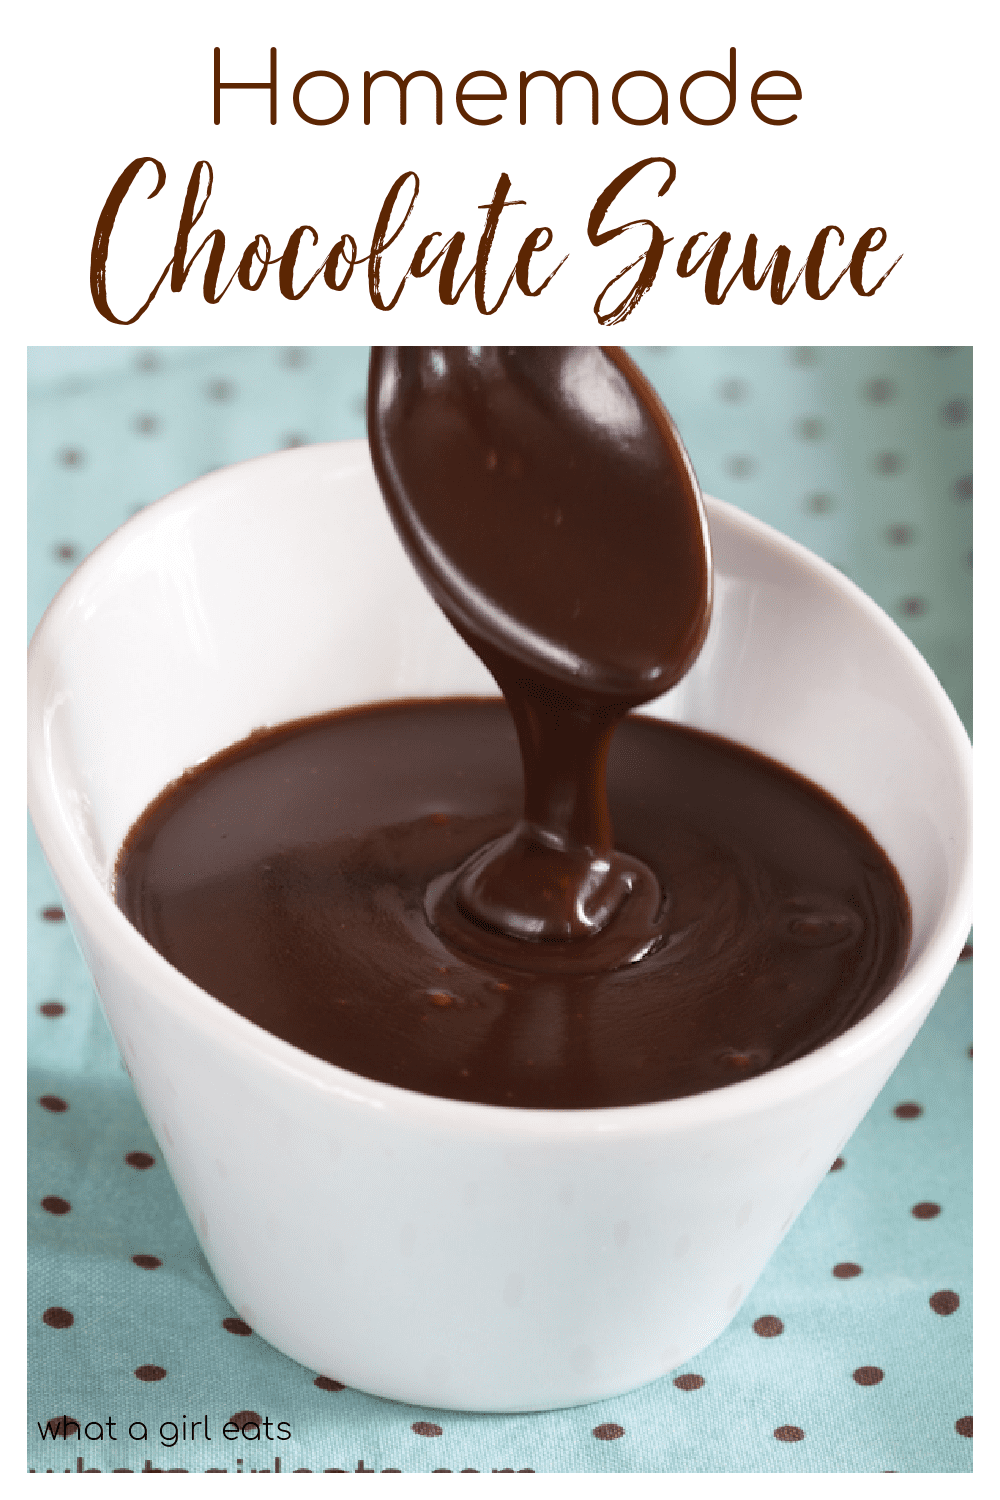 This chocolate sauce recipe is perfect on a scoop of ice cream, pound cake or over fresh fruit like poached pears.